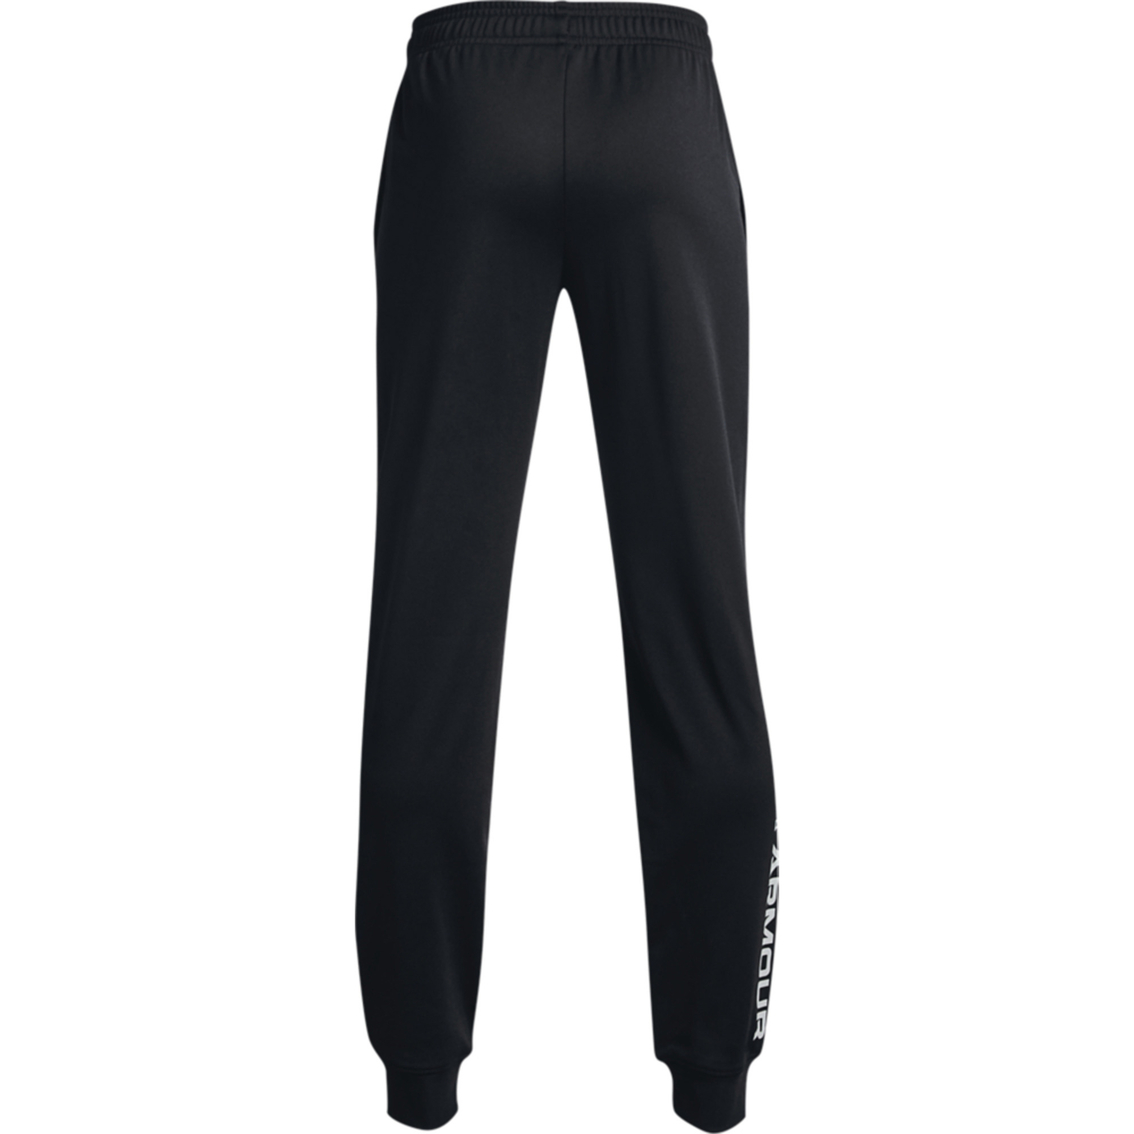 Under Armour Boys Black and Gray Brawler 2.0 Tapered Pants - Image 2 of 2